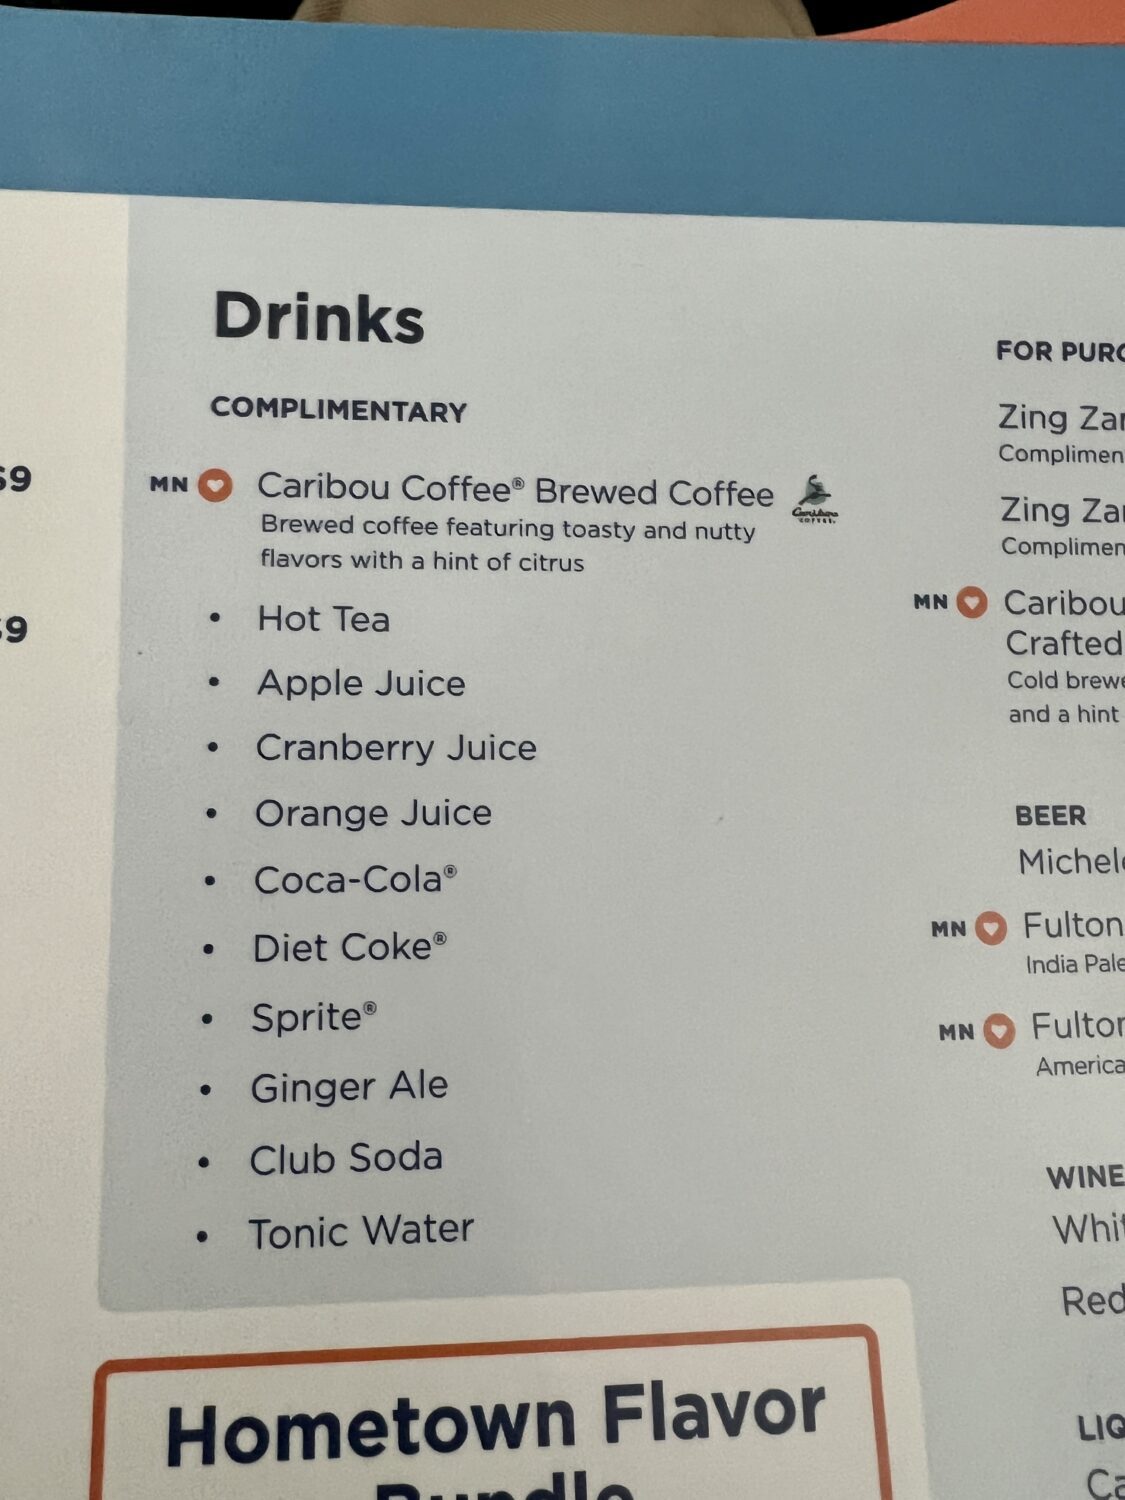 sun country airlines drink menu